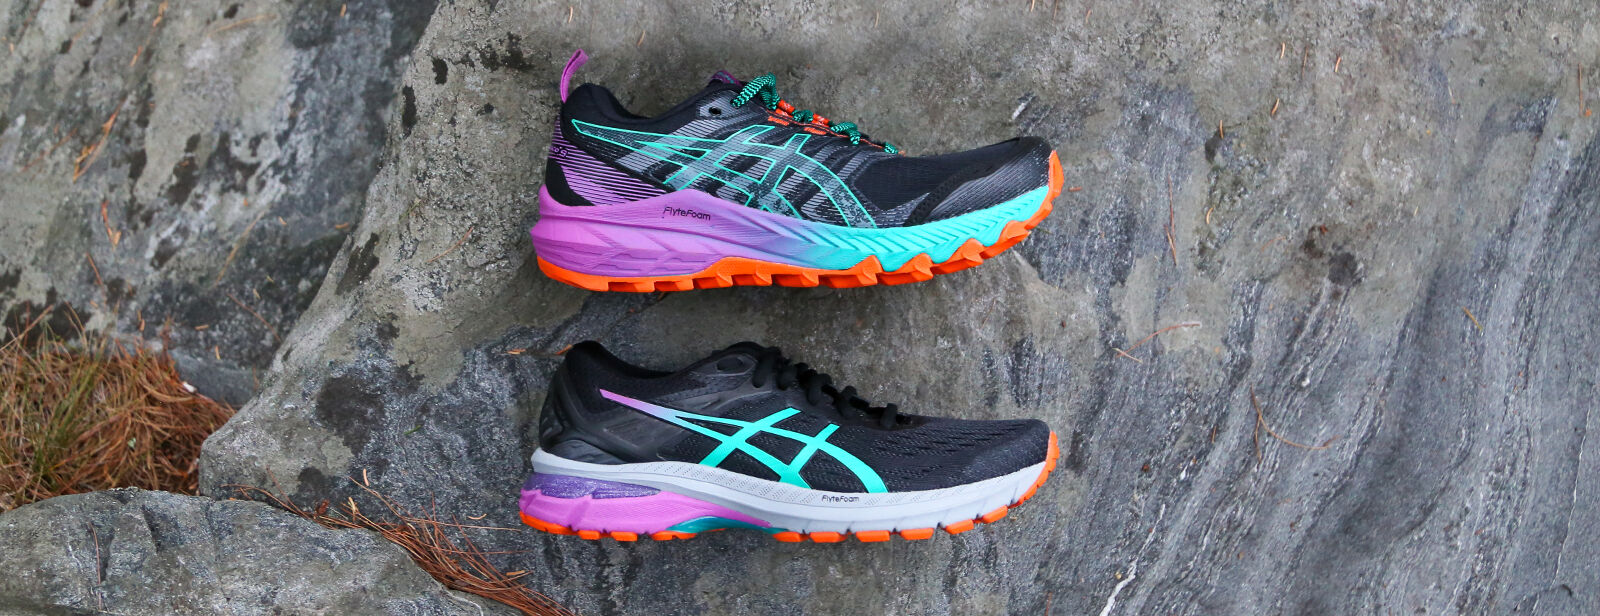 What Are the Tops of Asics Running Shoes Made of?